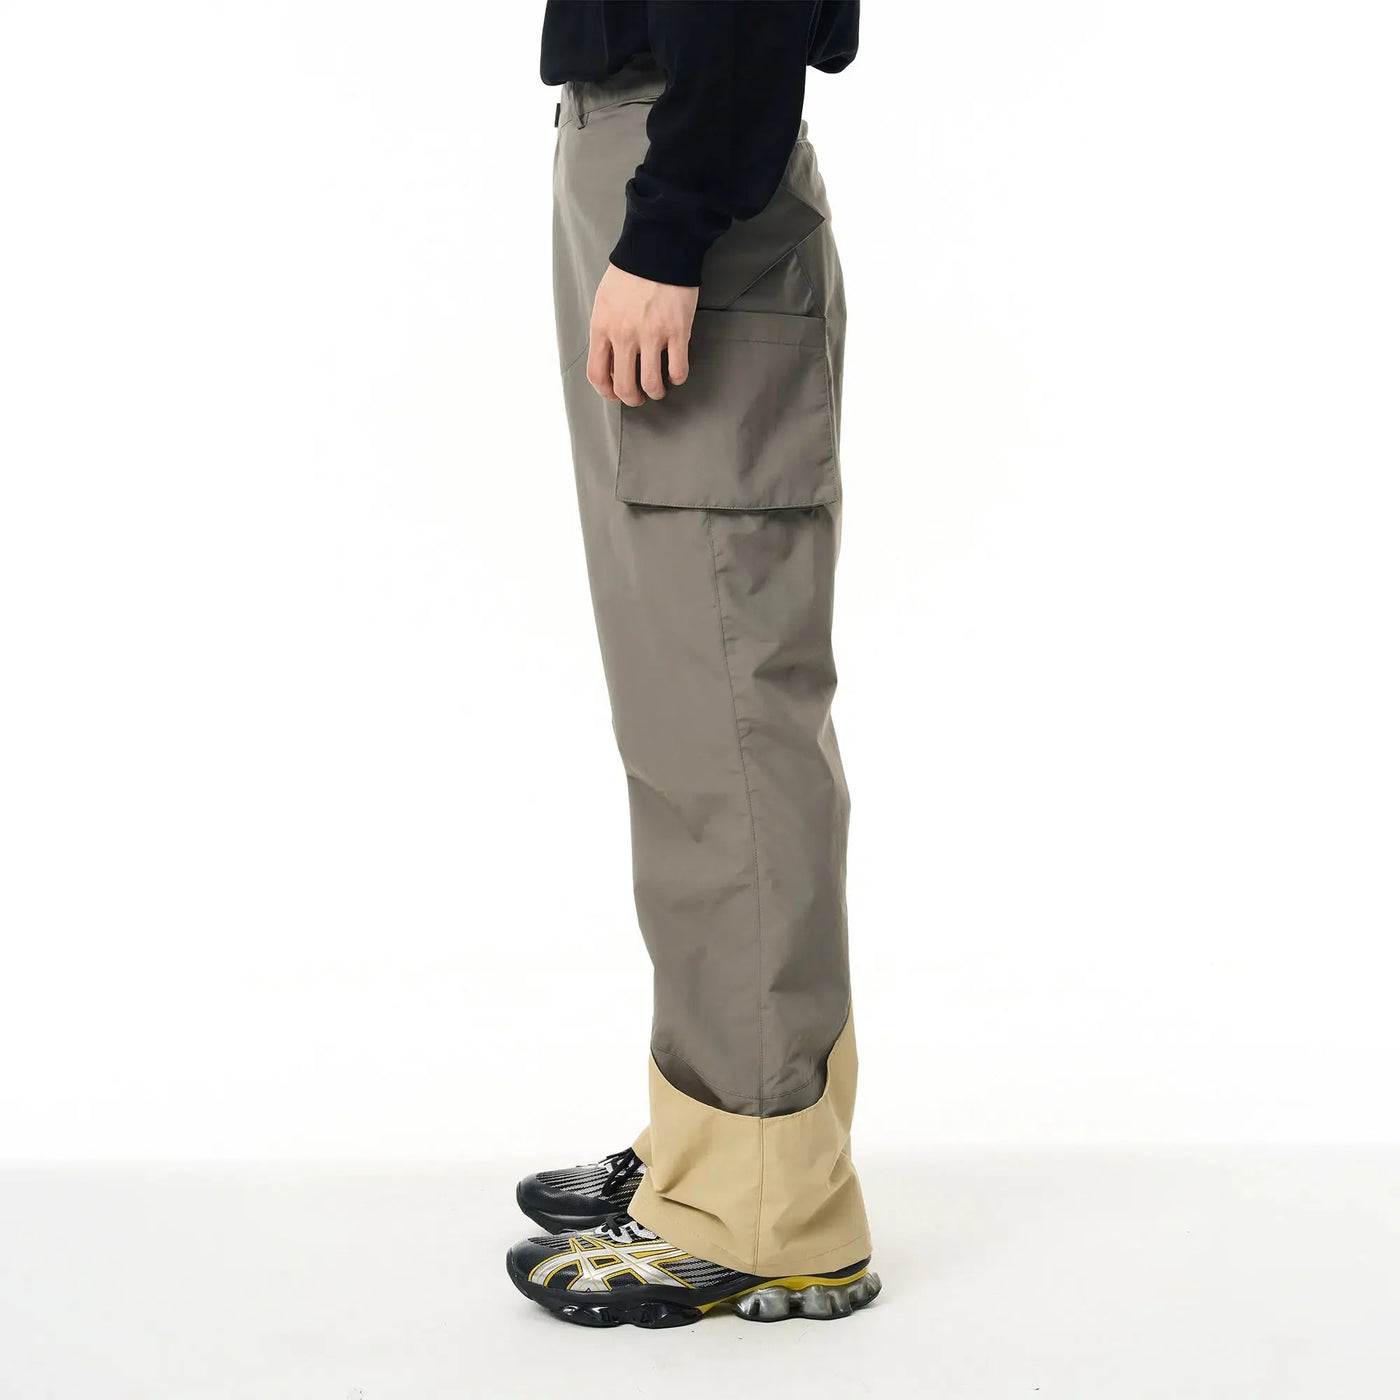 7440 37 1 Contrast Ends Layer Cargo Pants Korean Street Fashion Pants By 7440 37 1 Shop Online at OH Vault